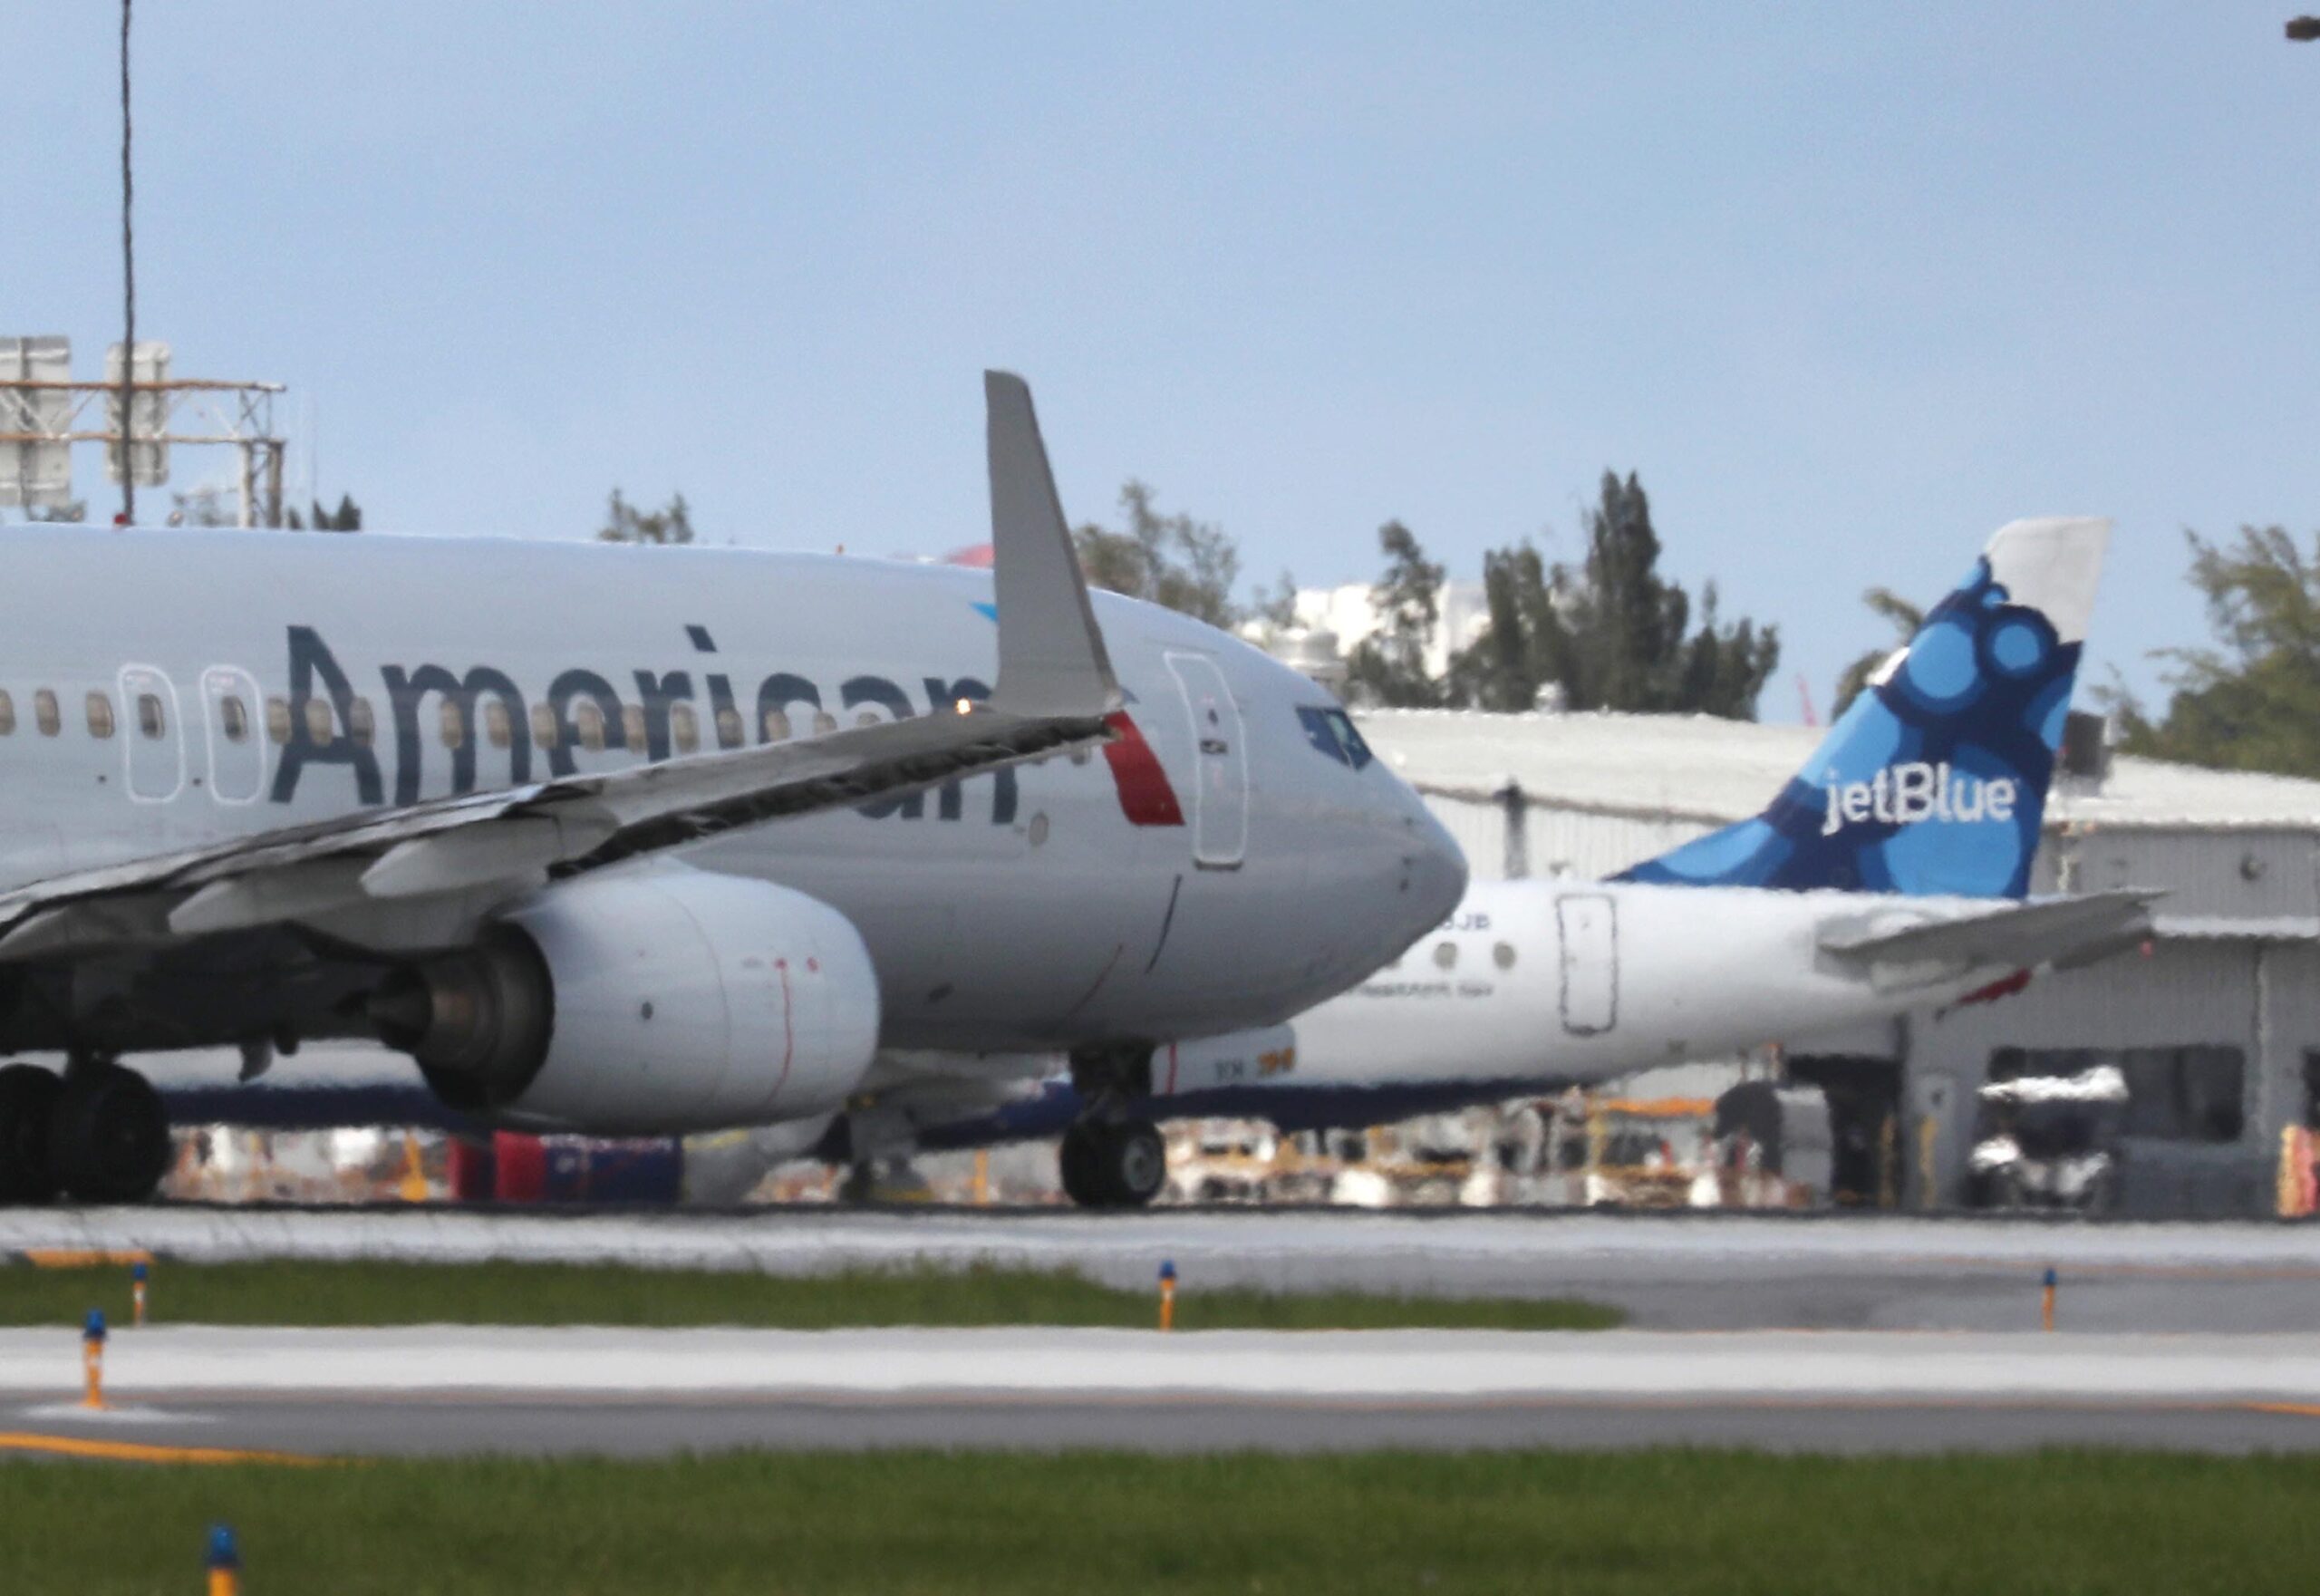 An American Airlines plane takes off near a parked JetBlue plane at the Fort Lauderdale-Hollywood International Airport on July 16